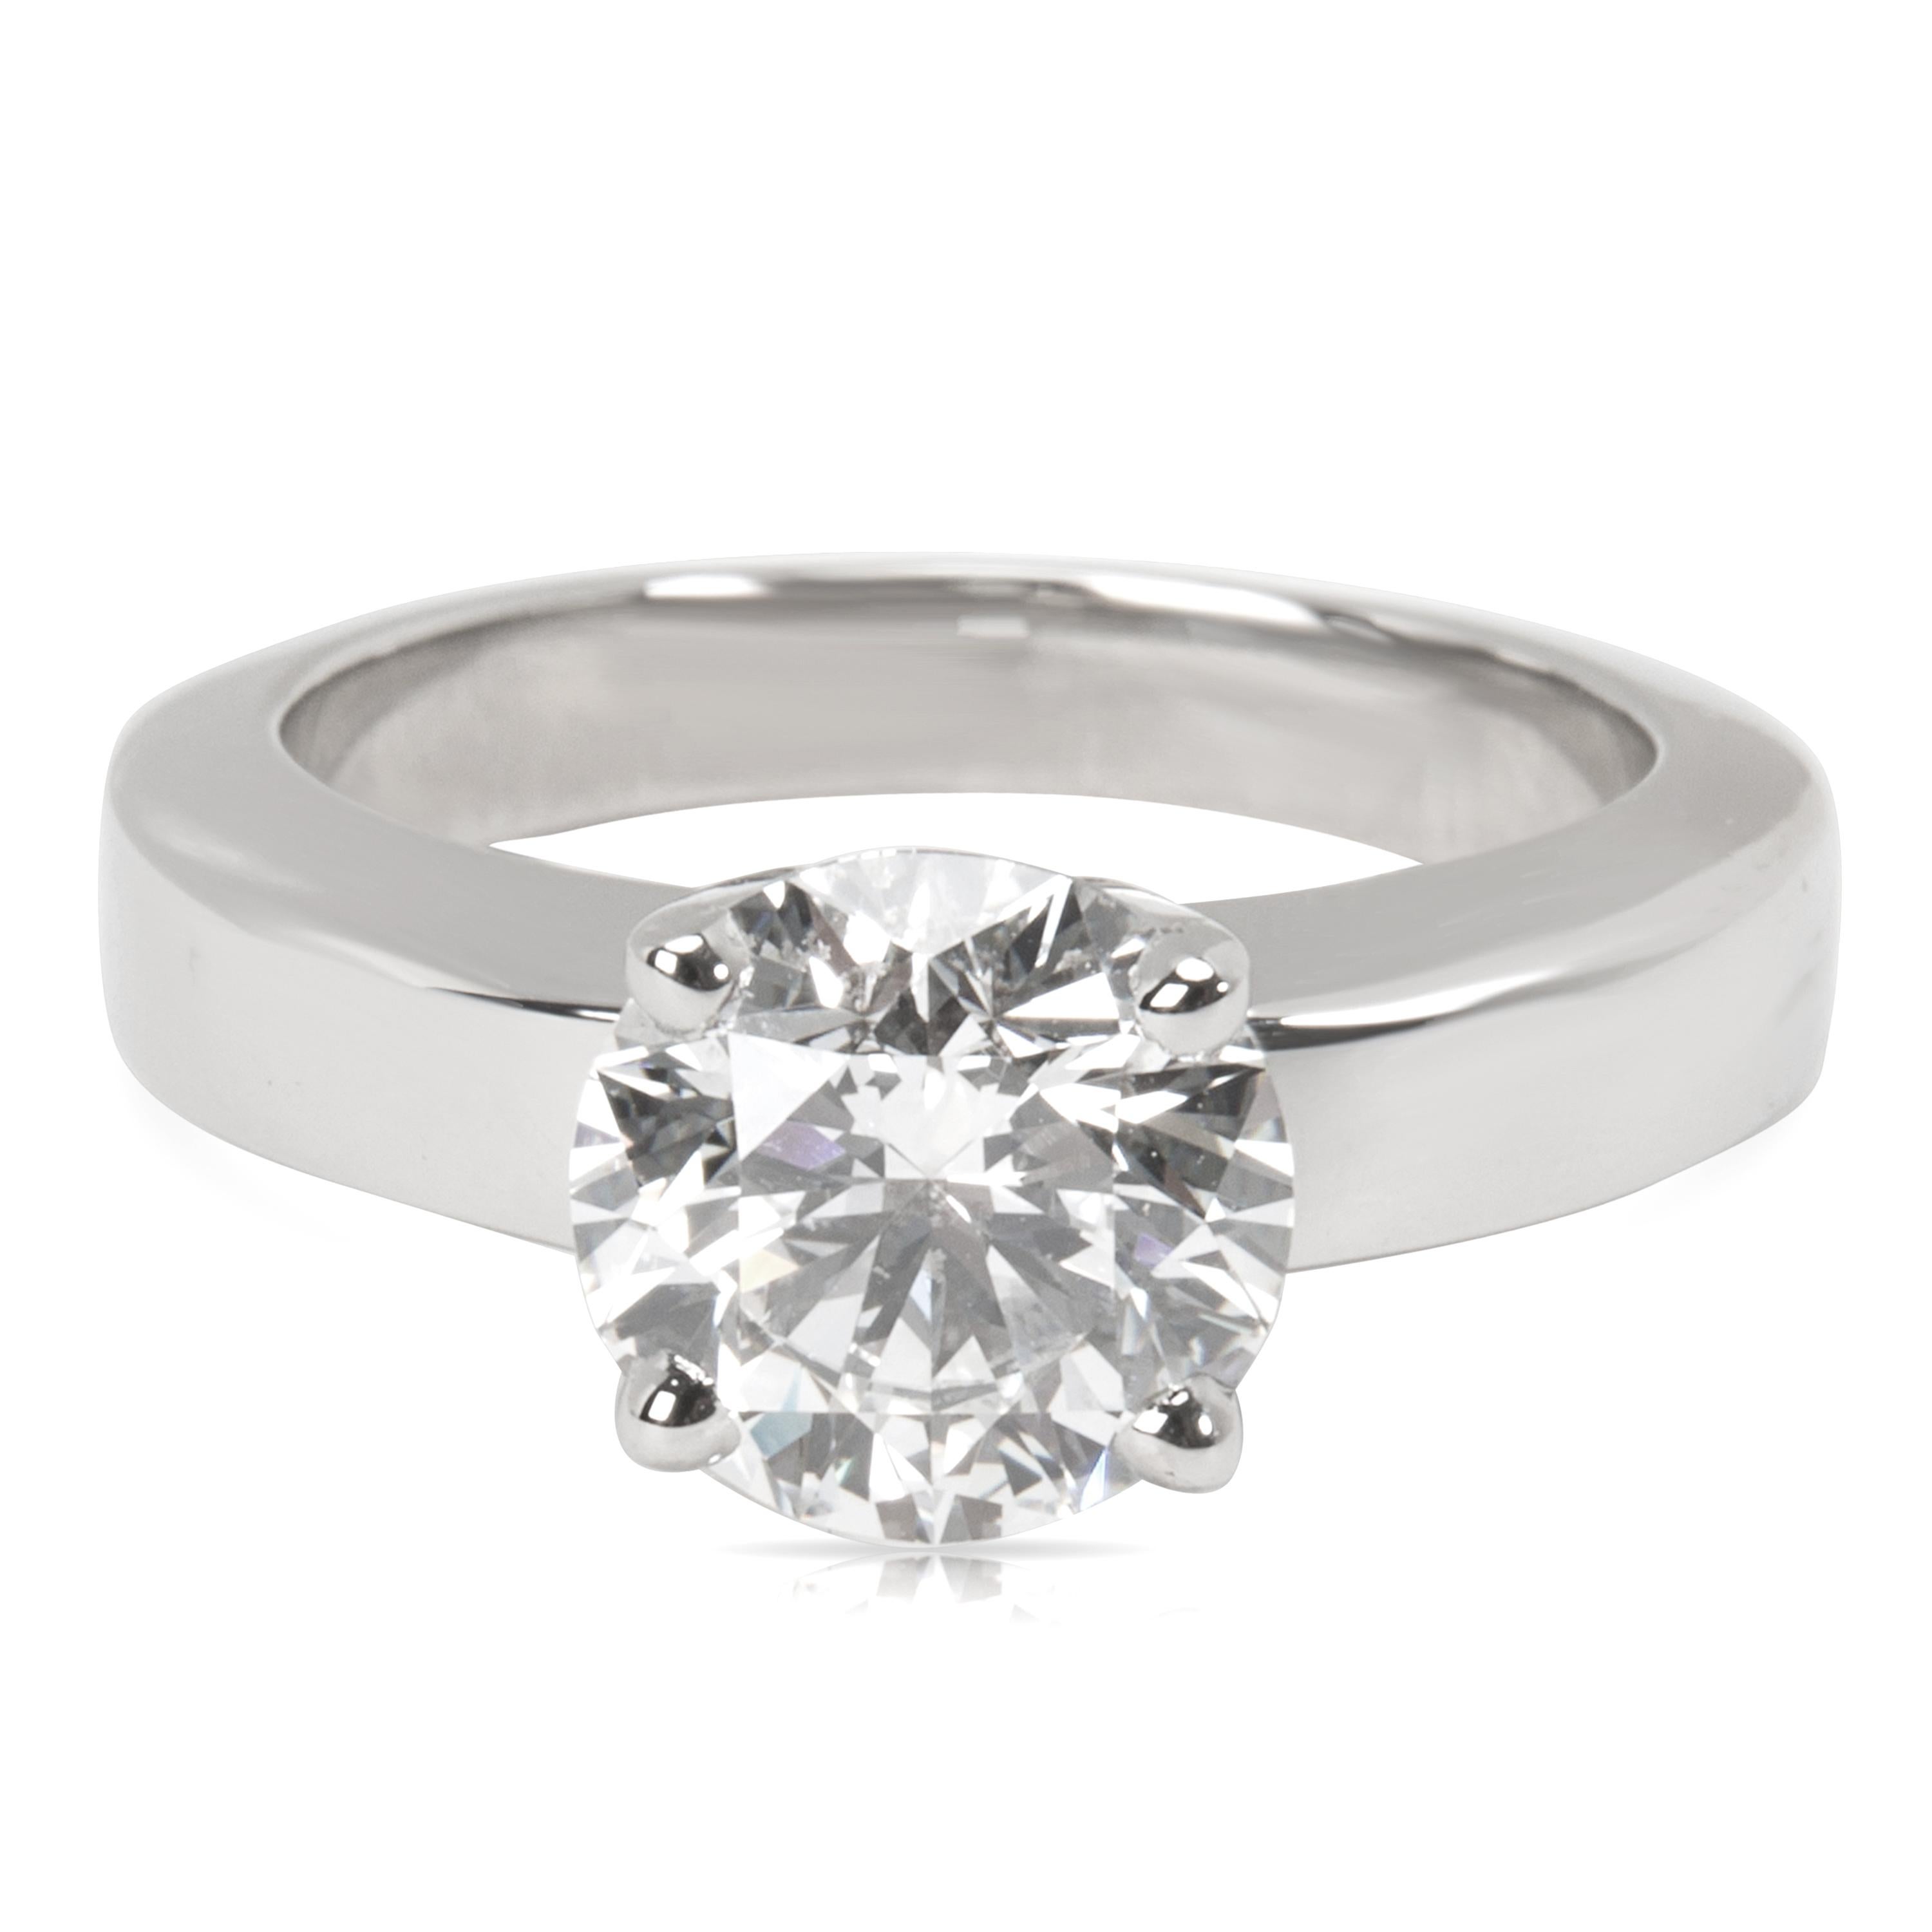 Cartier Diamond Solitaire Engagement Ring in Platinum GIA Certified 1.80 Carat